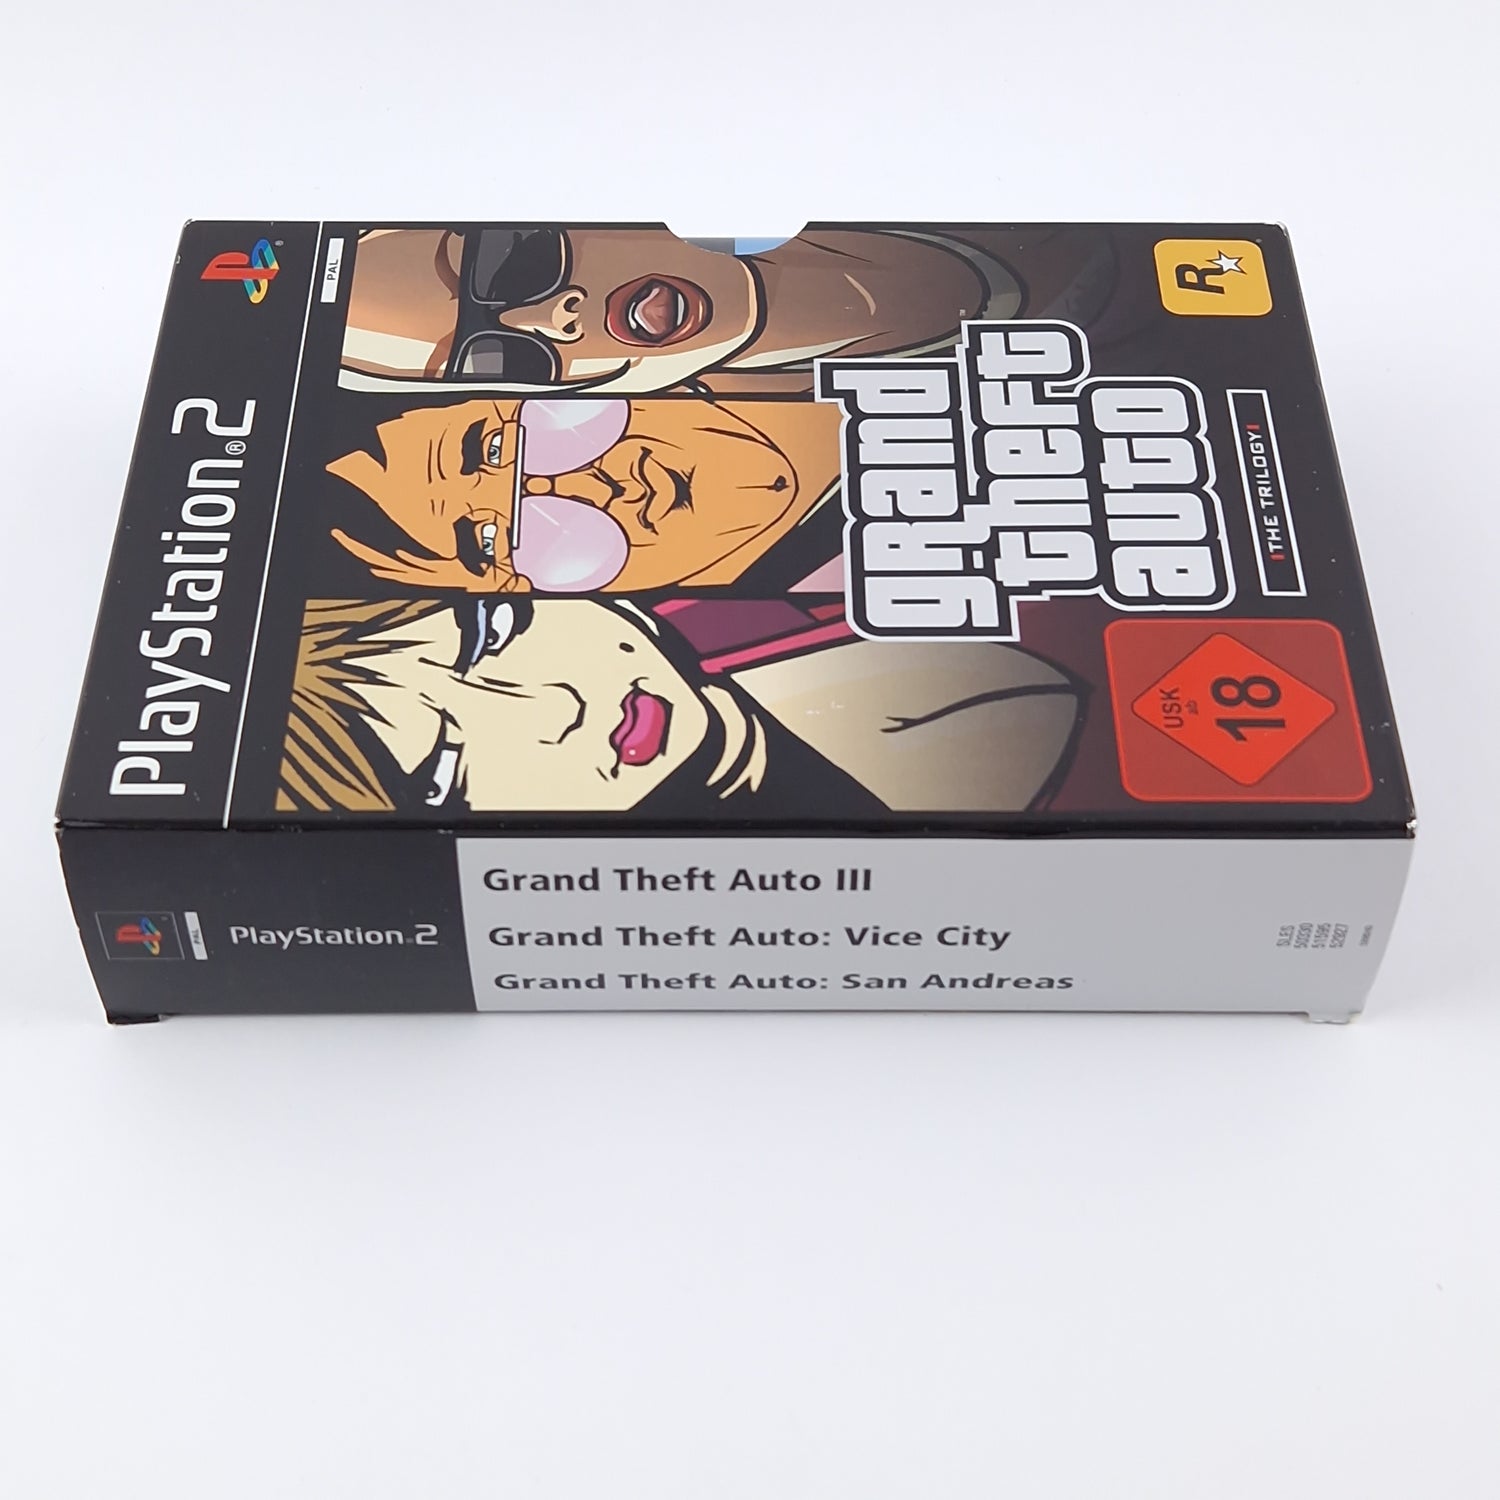 Sony Playstation 2 Spiel : Grand Theft Auto The Trilogy - OVP Anleitung GTA PS2